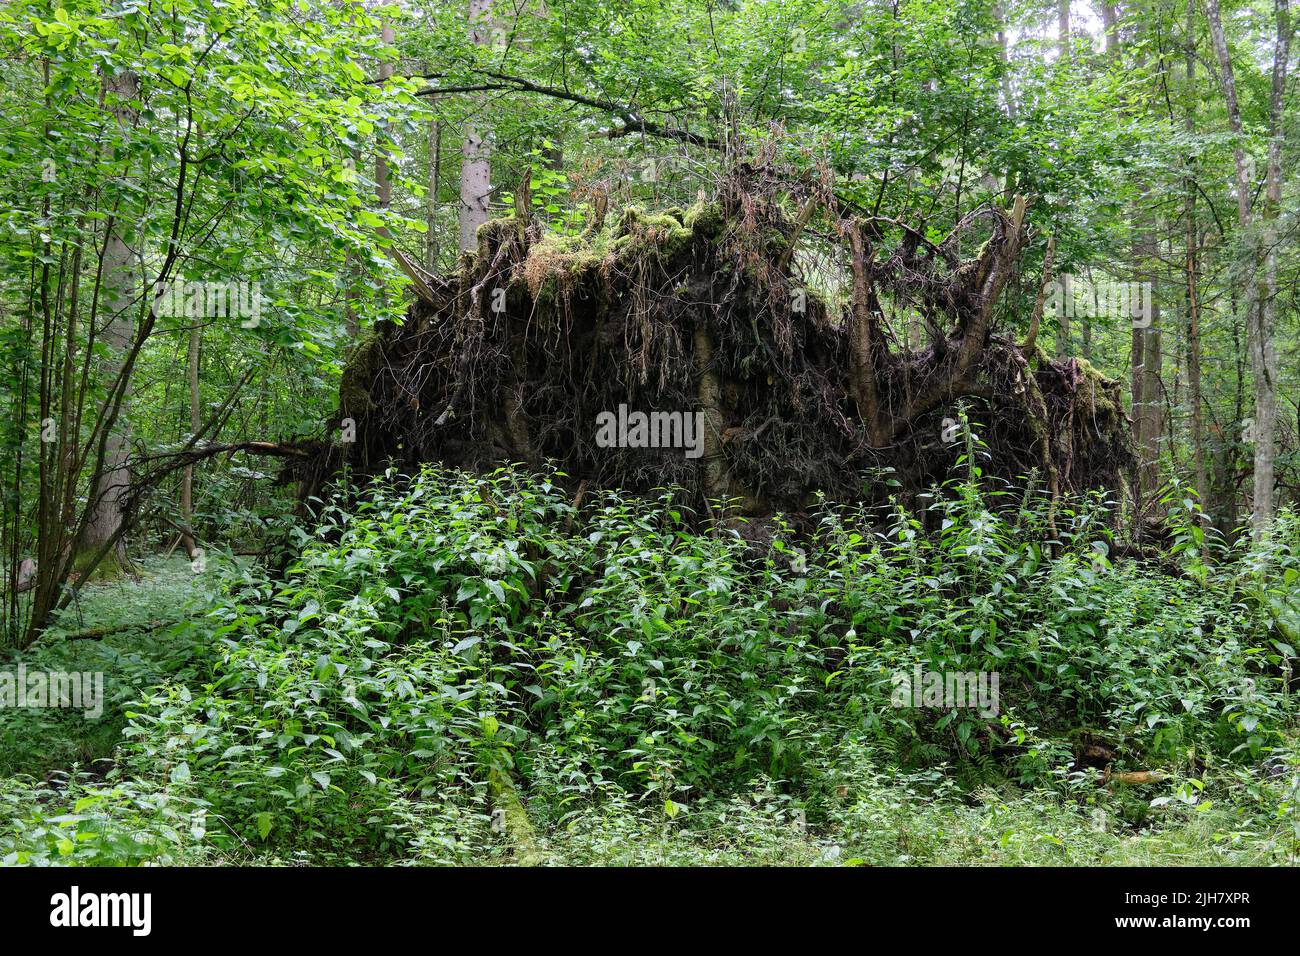 Partly declined broken oak roots in summertime deciduous forest with lots of nettle in foreground, Bialowieza Forest, Poland, Europe Stock Photo